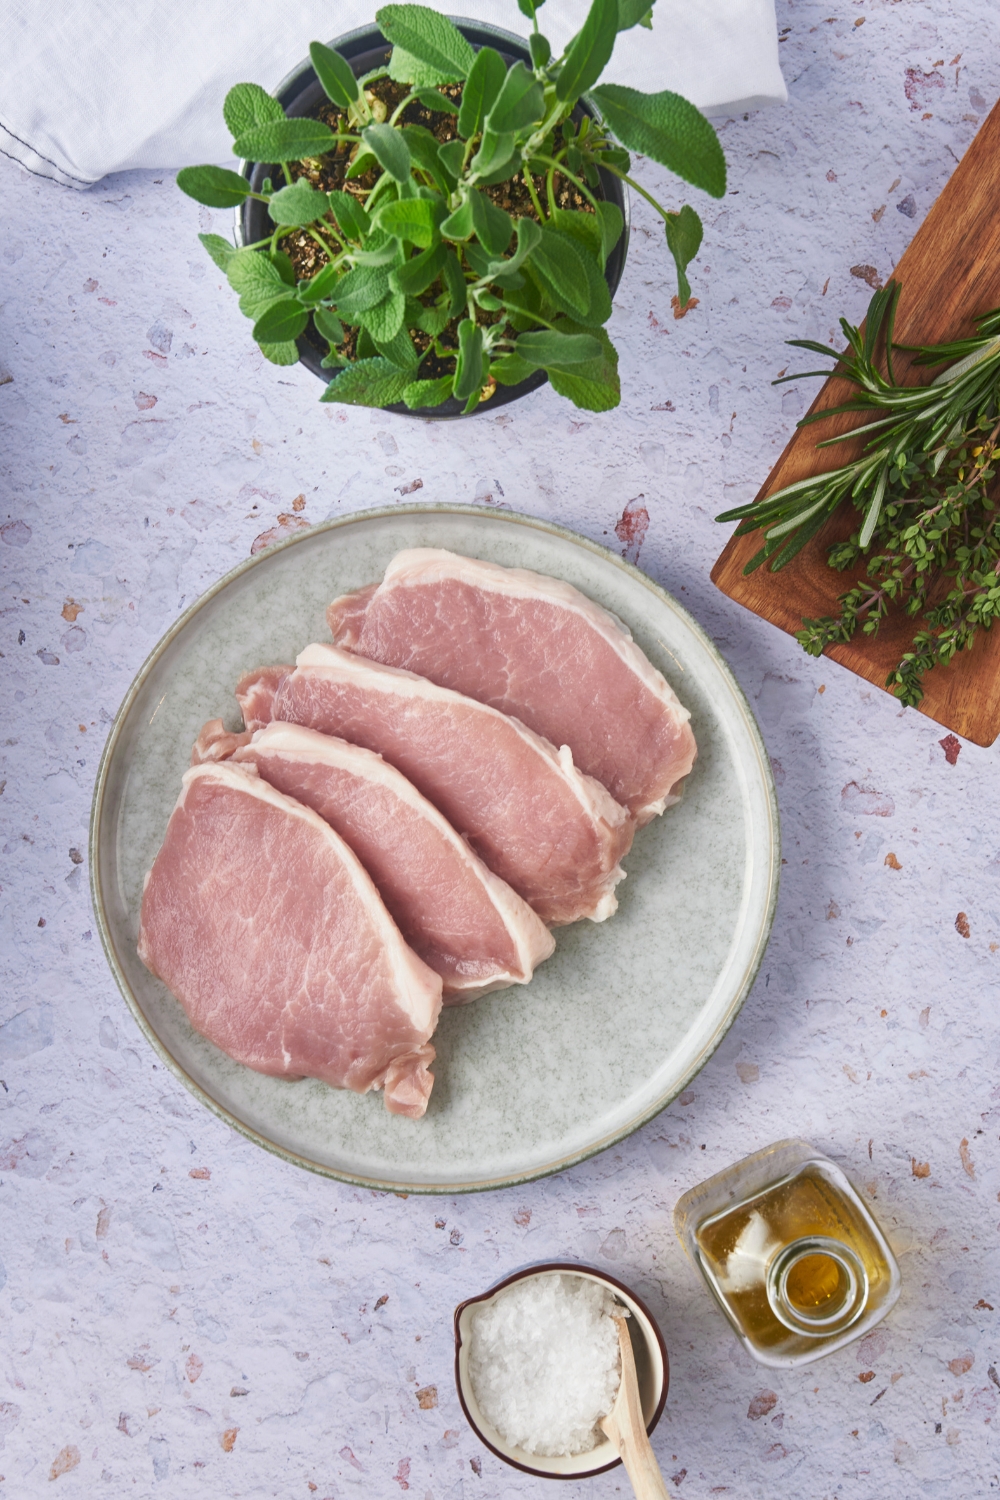 Four raw pork chops layered on top of each other surrounded by fresh herbs, a container of oil, and a bowl of salt.